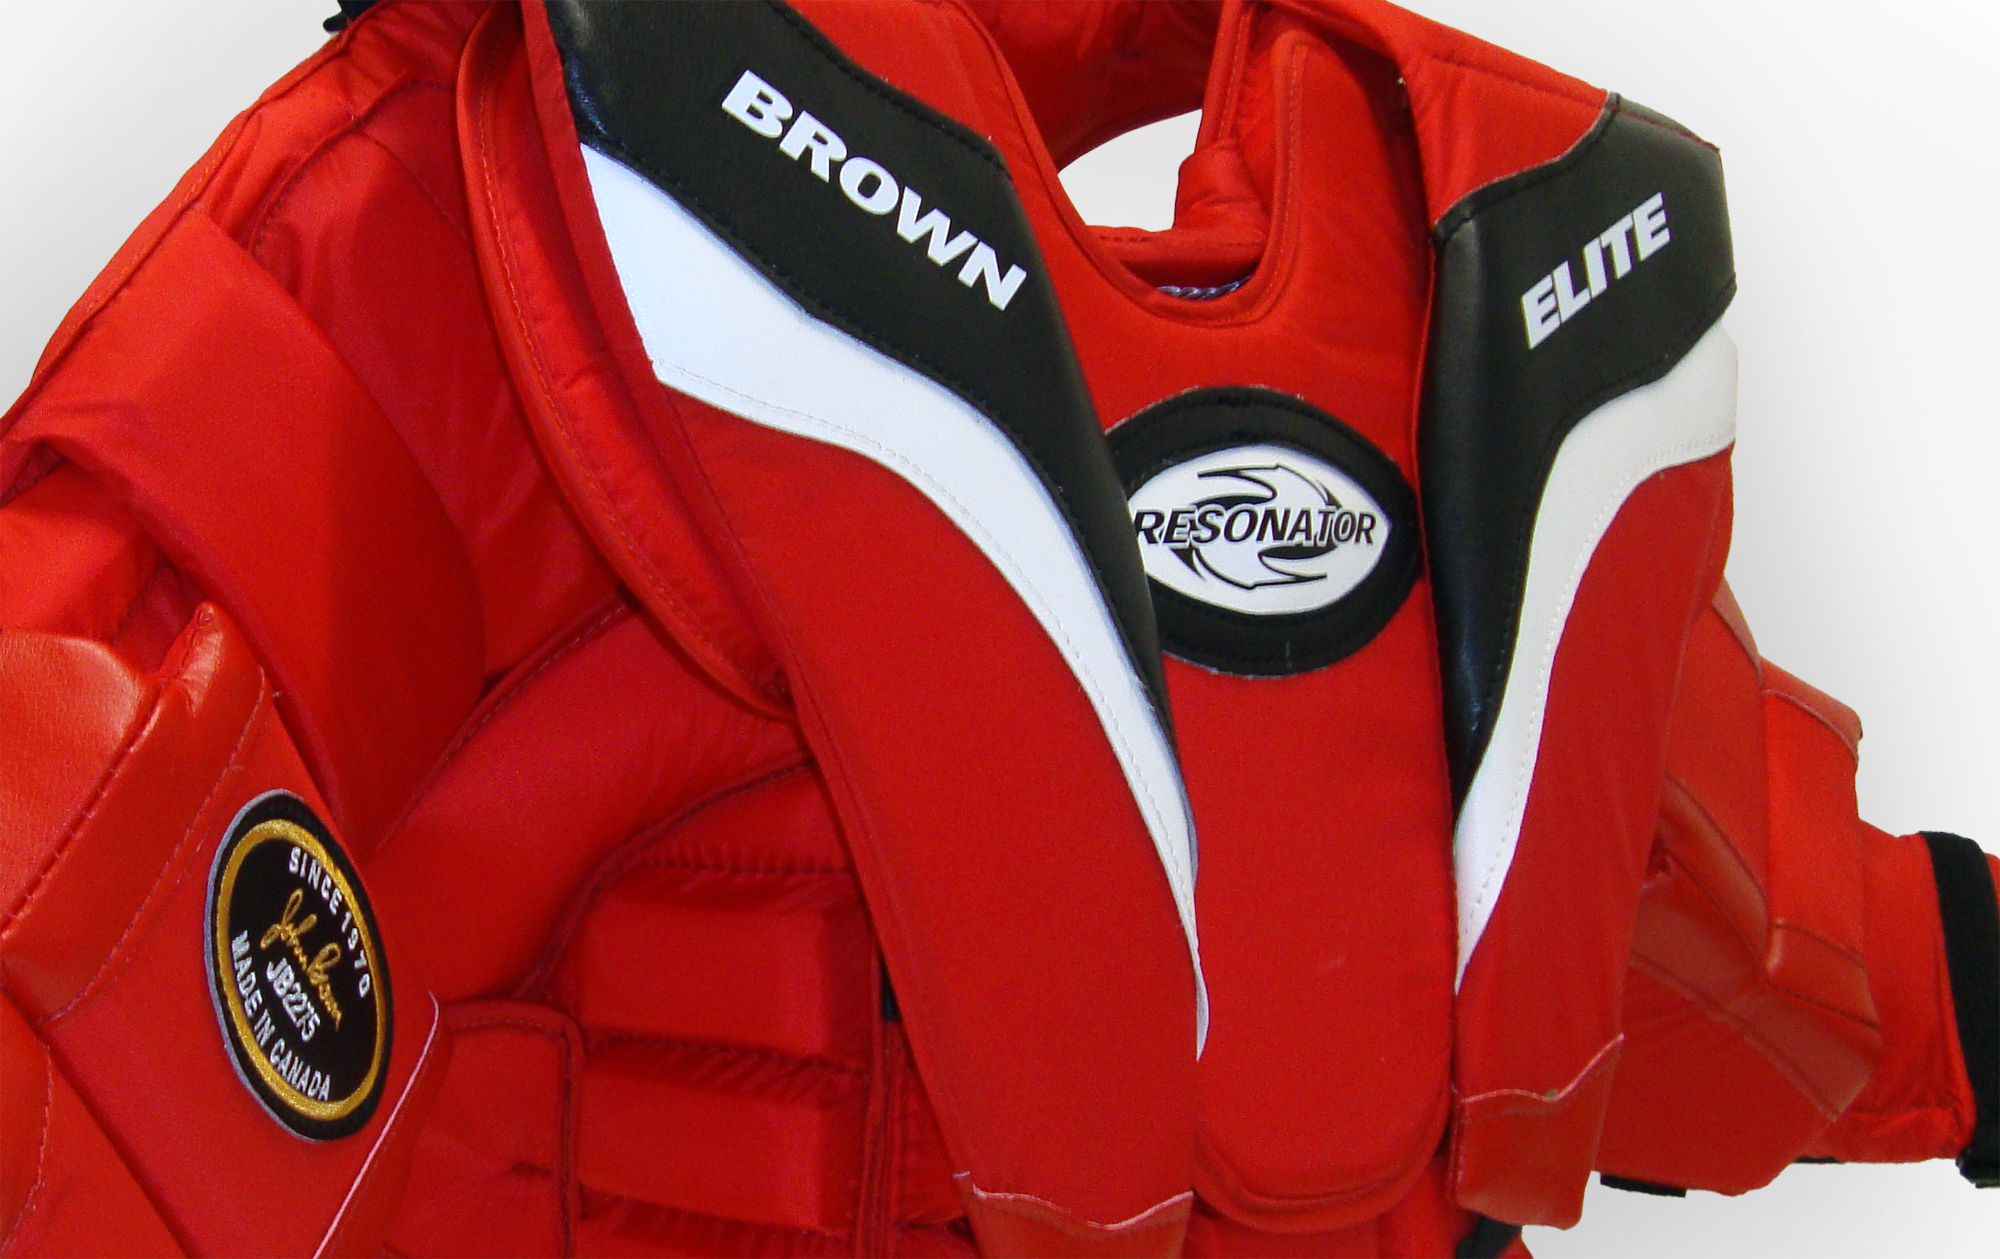 Custom 2275 chest protector in red